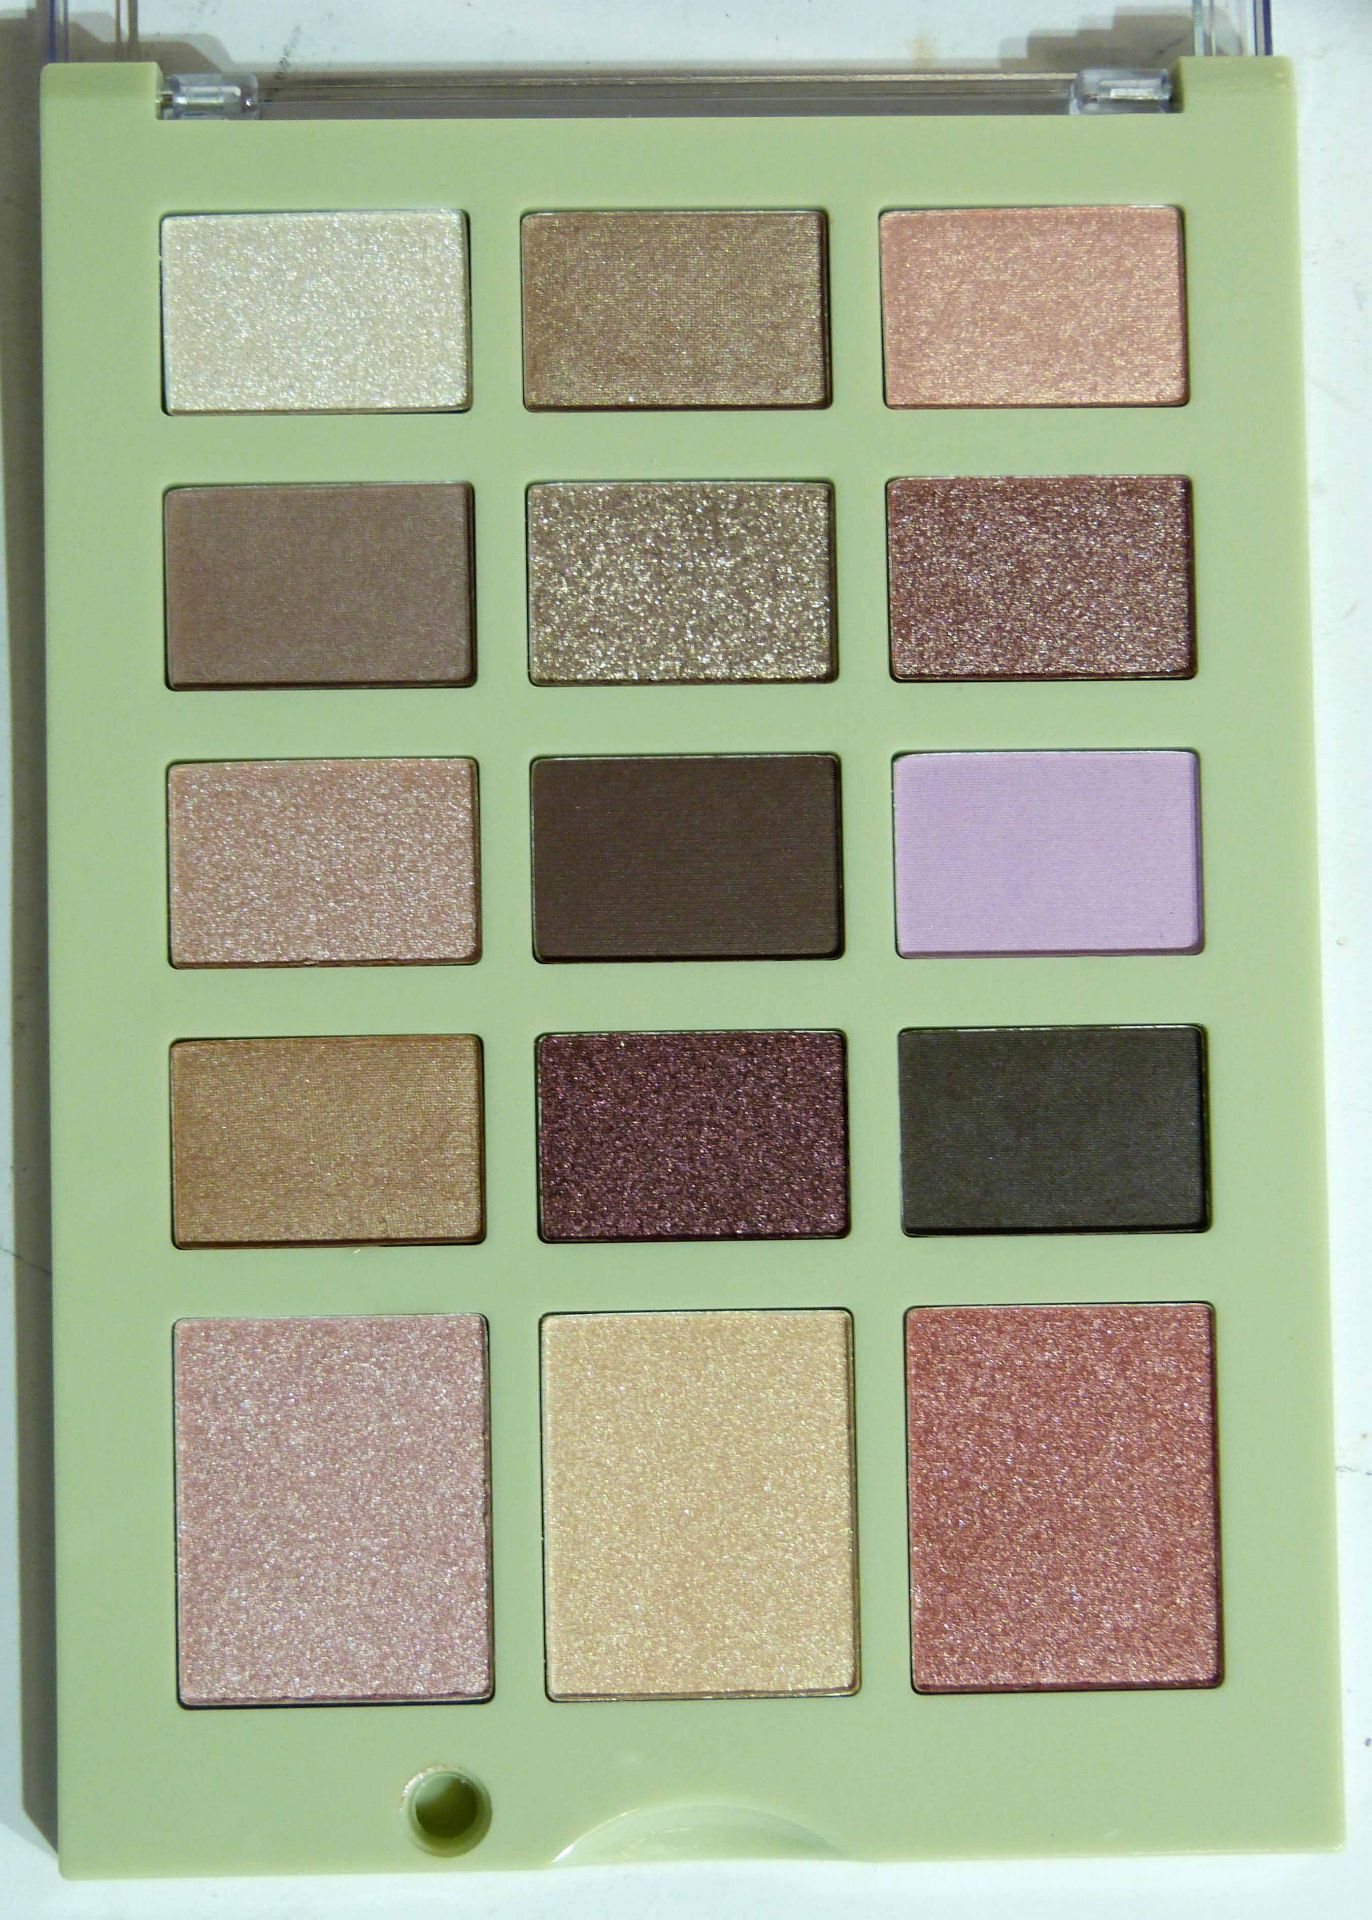 Pixi Beauty Hello Beautiful Face Case – Hello English Rose 15 colour palette. (10 in lot) - Image 4 of 6